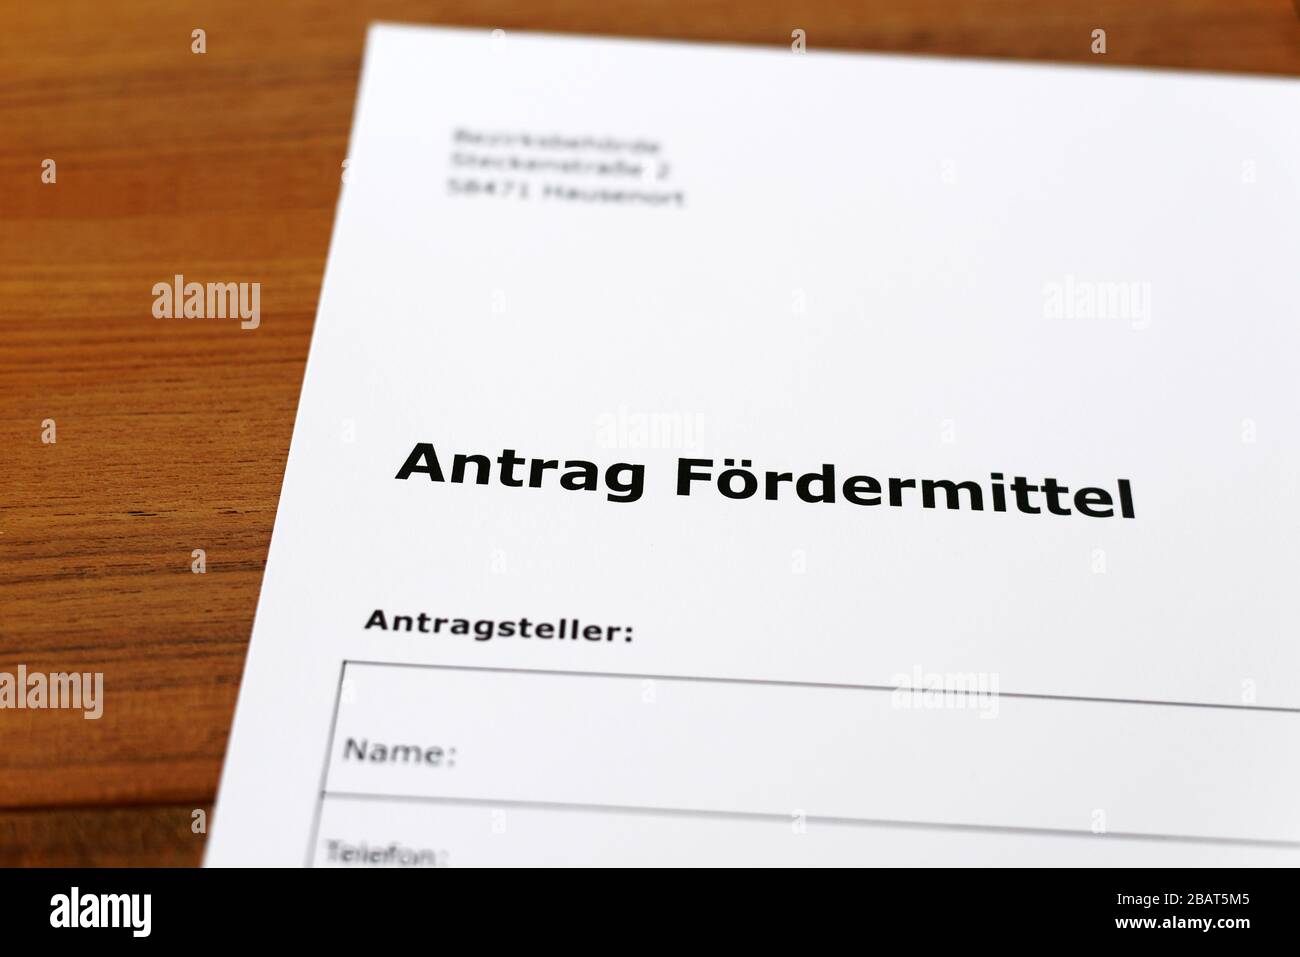 A sheet of paper with the german words 'Antrag Fördermittel' - Translation in englisch: Application for funding. Stock Photo